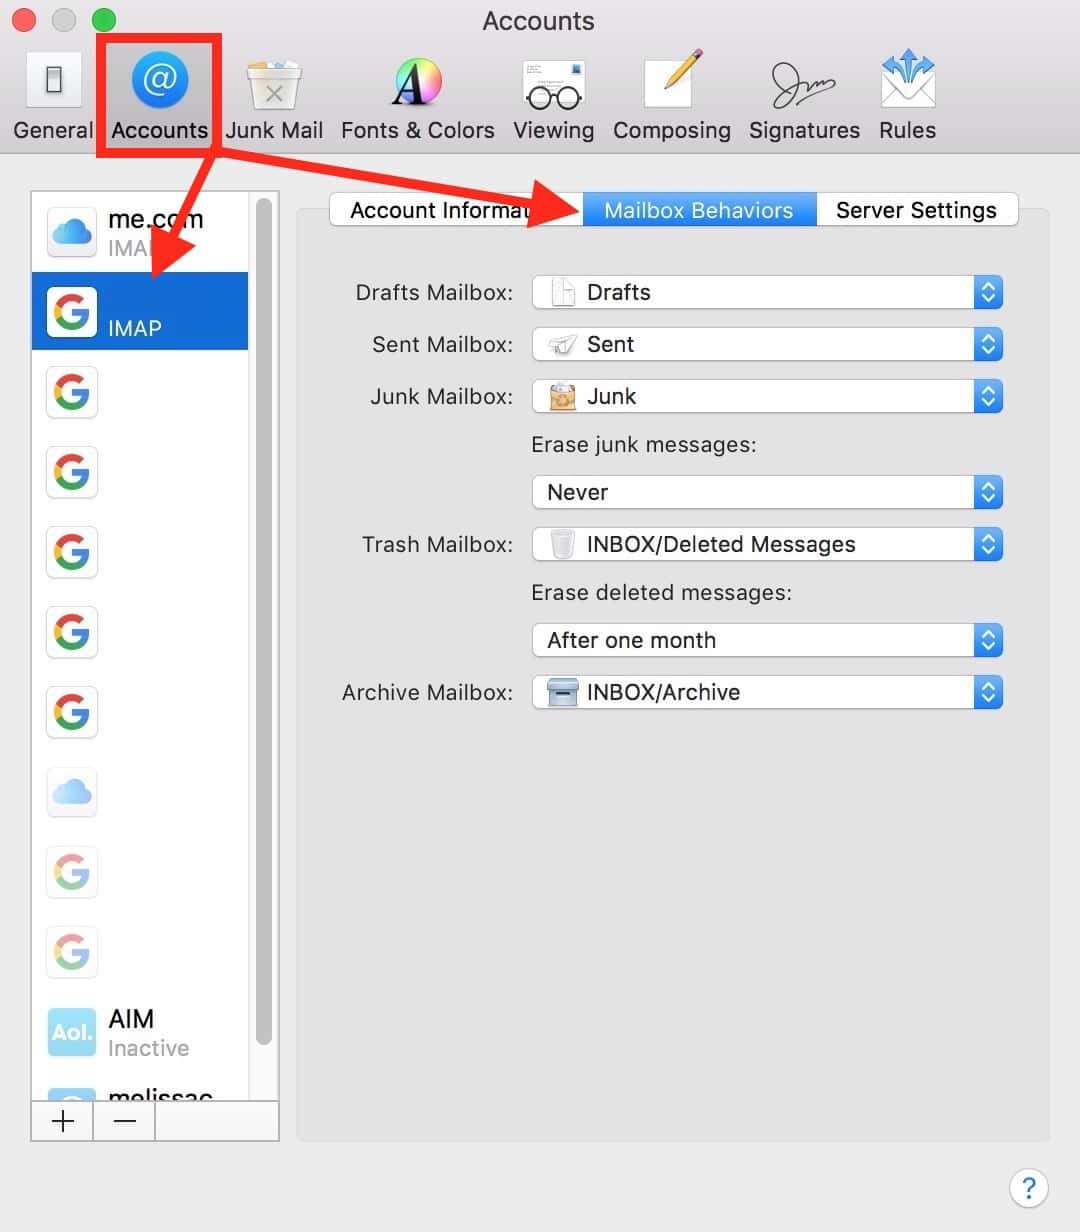 Accounts Tab in Mail preferences shows you mailbox behaviors